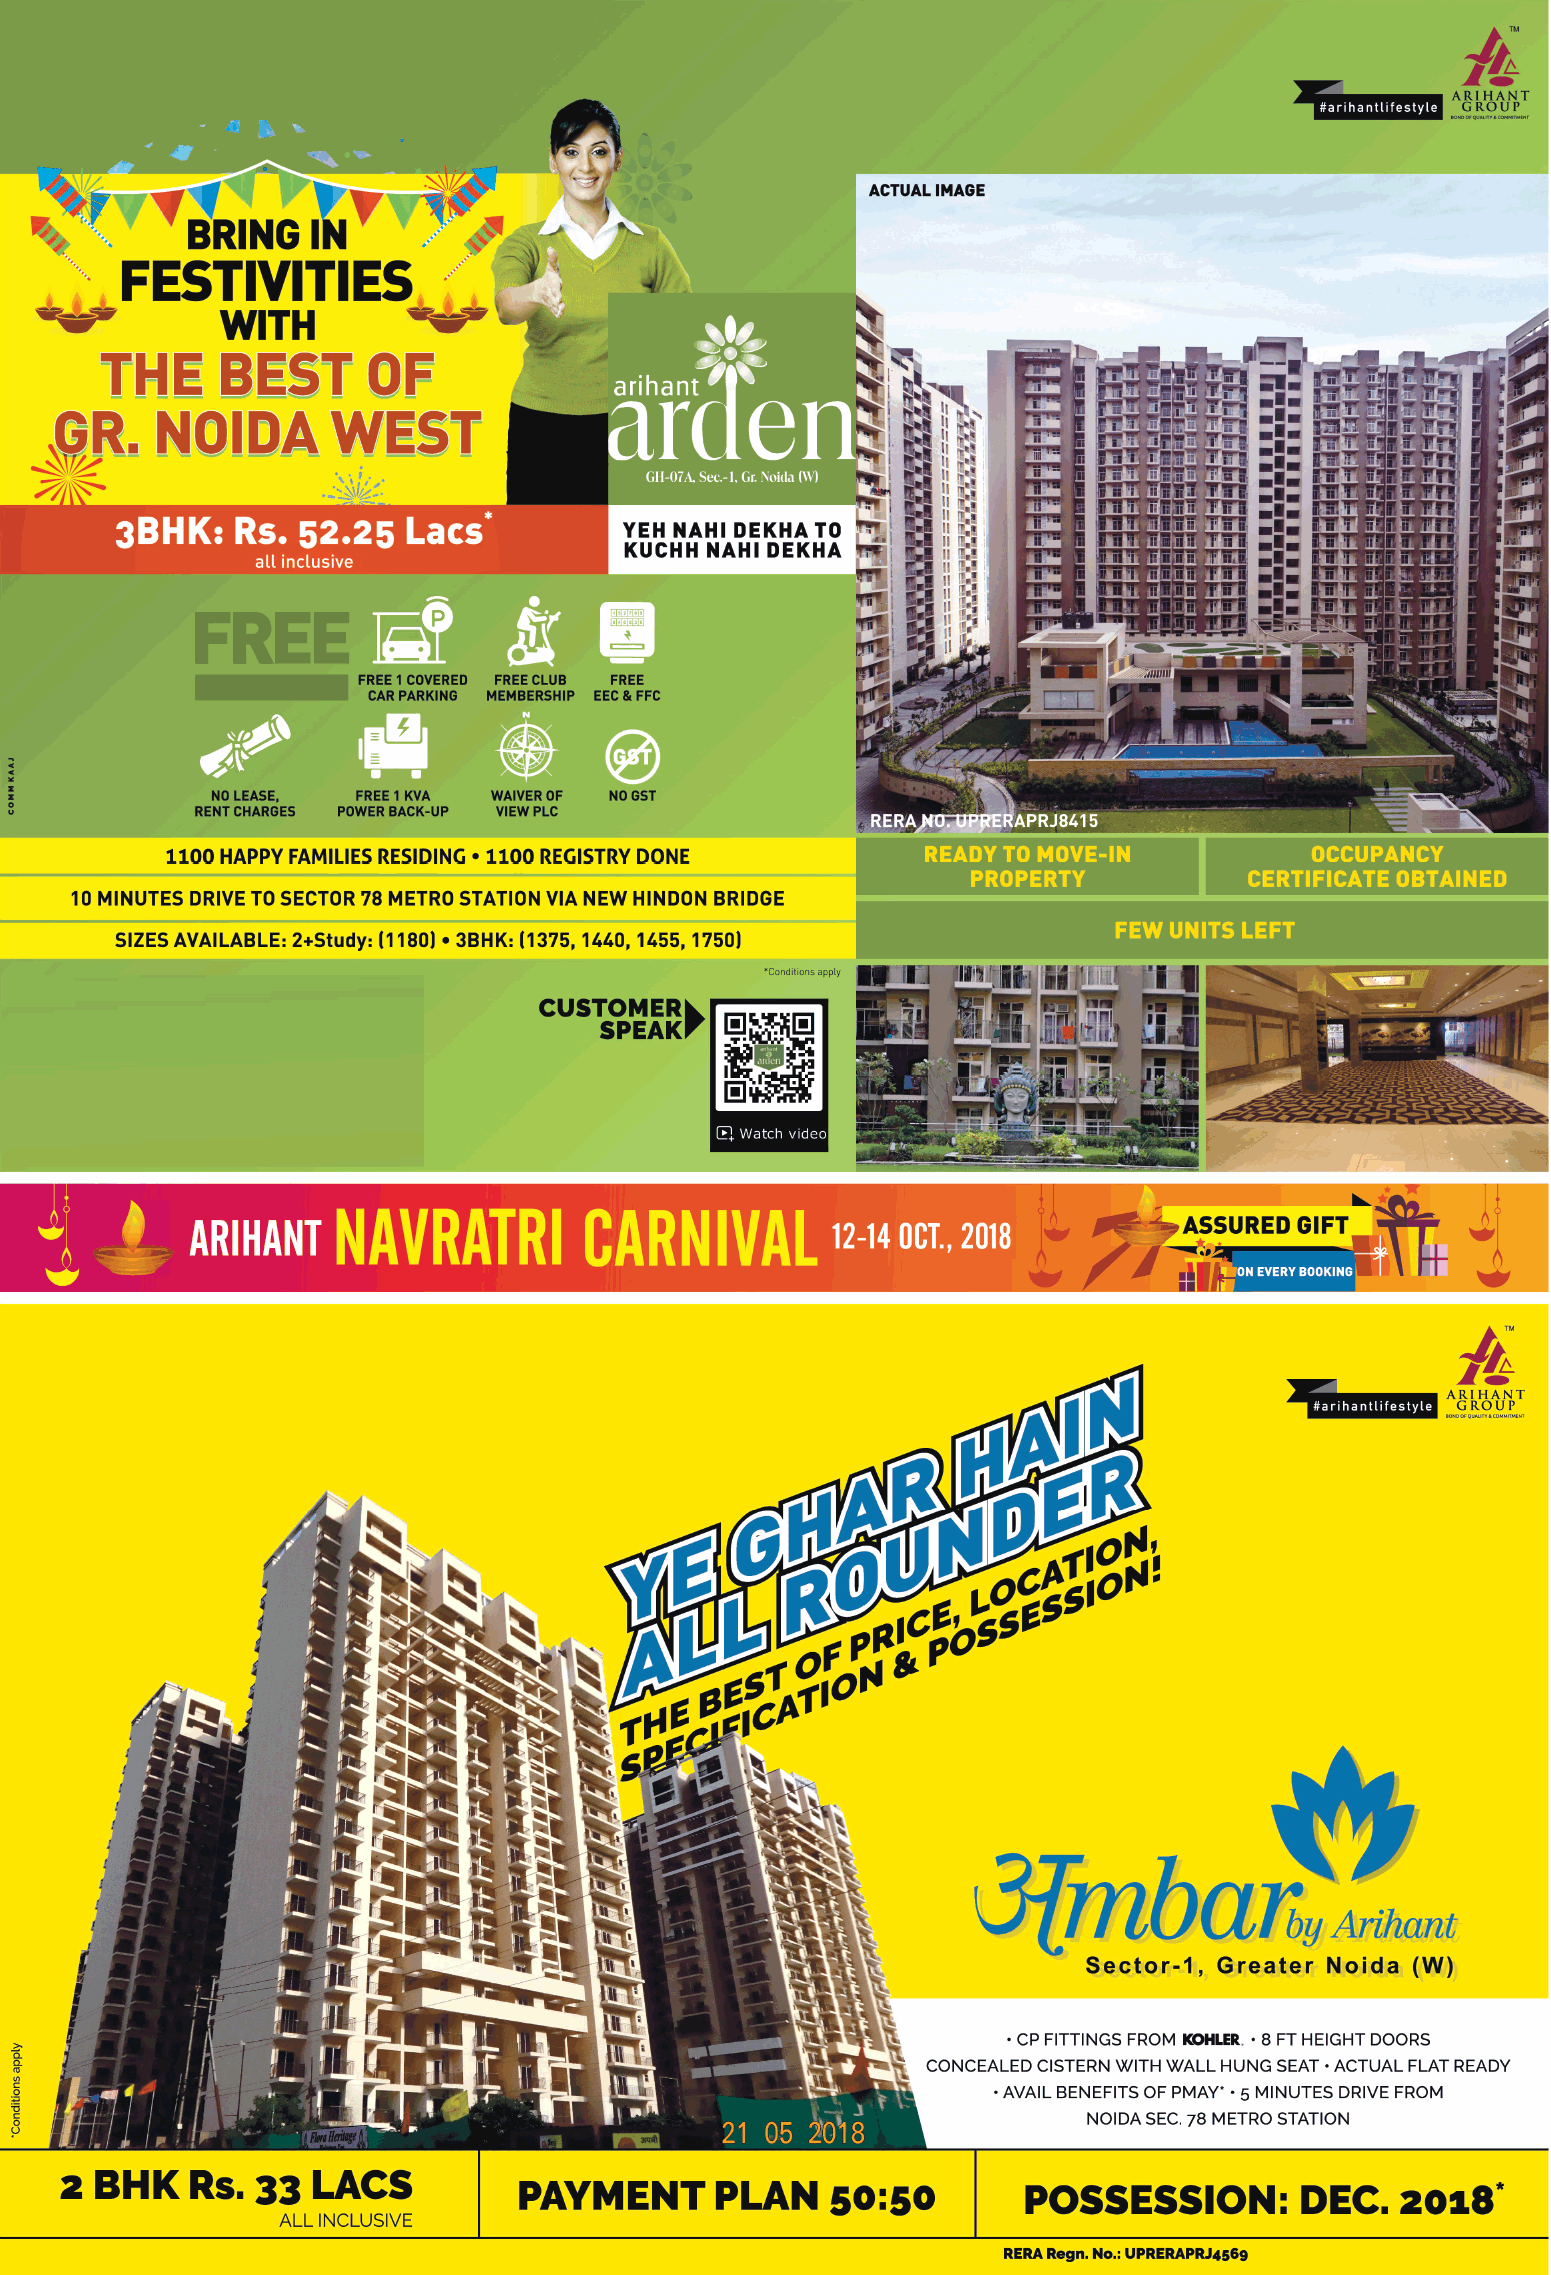 Book 2 & 3 bhk apartments at Arihant Projects in Greater Noida Update